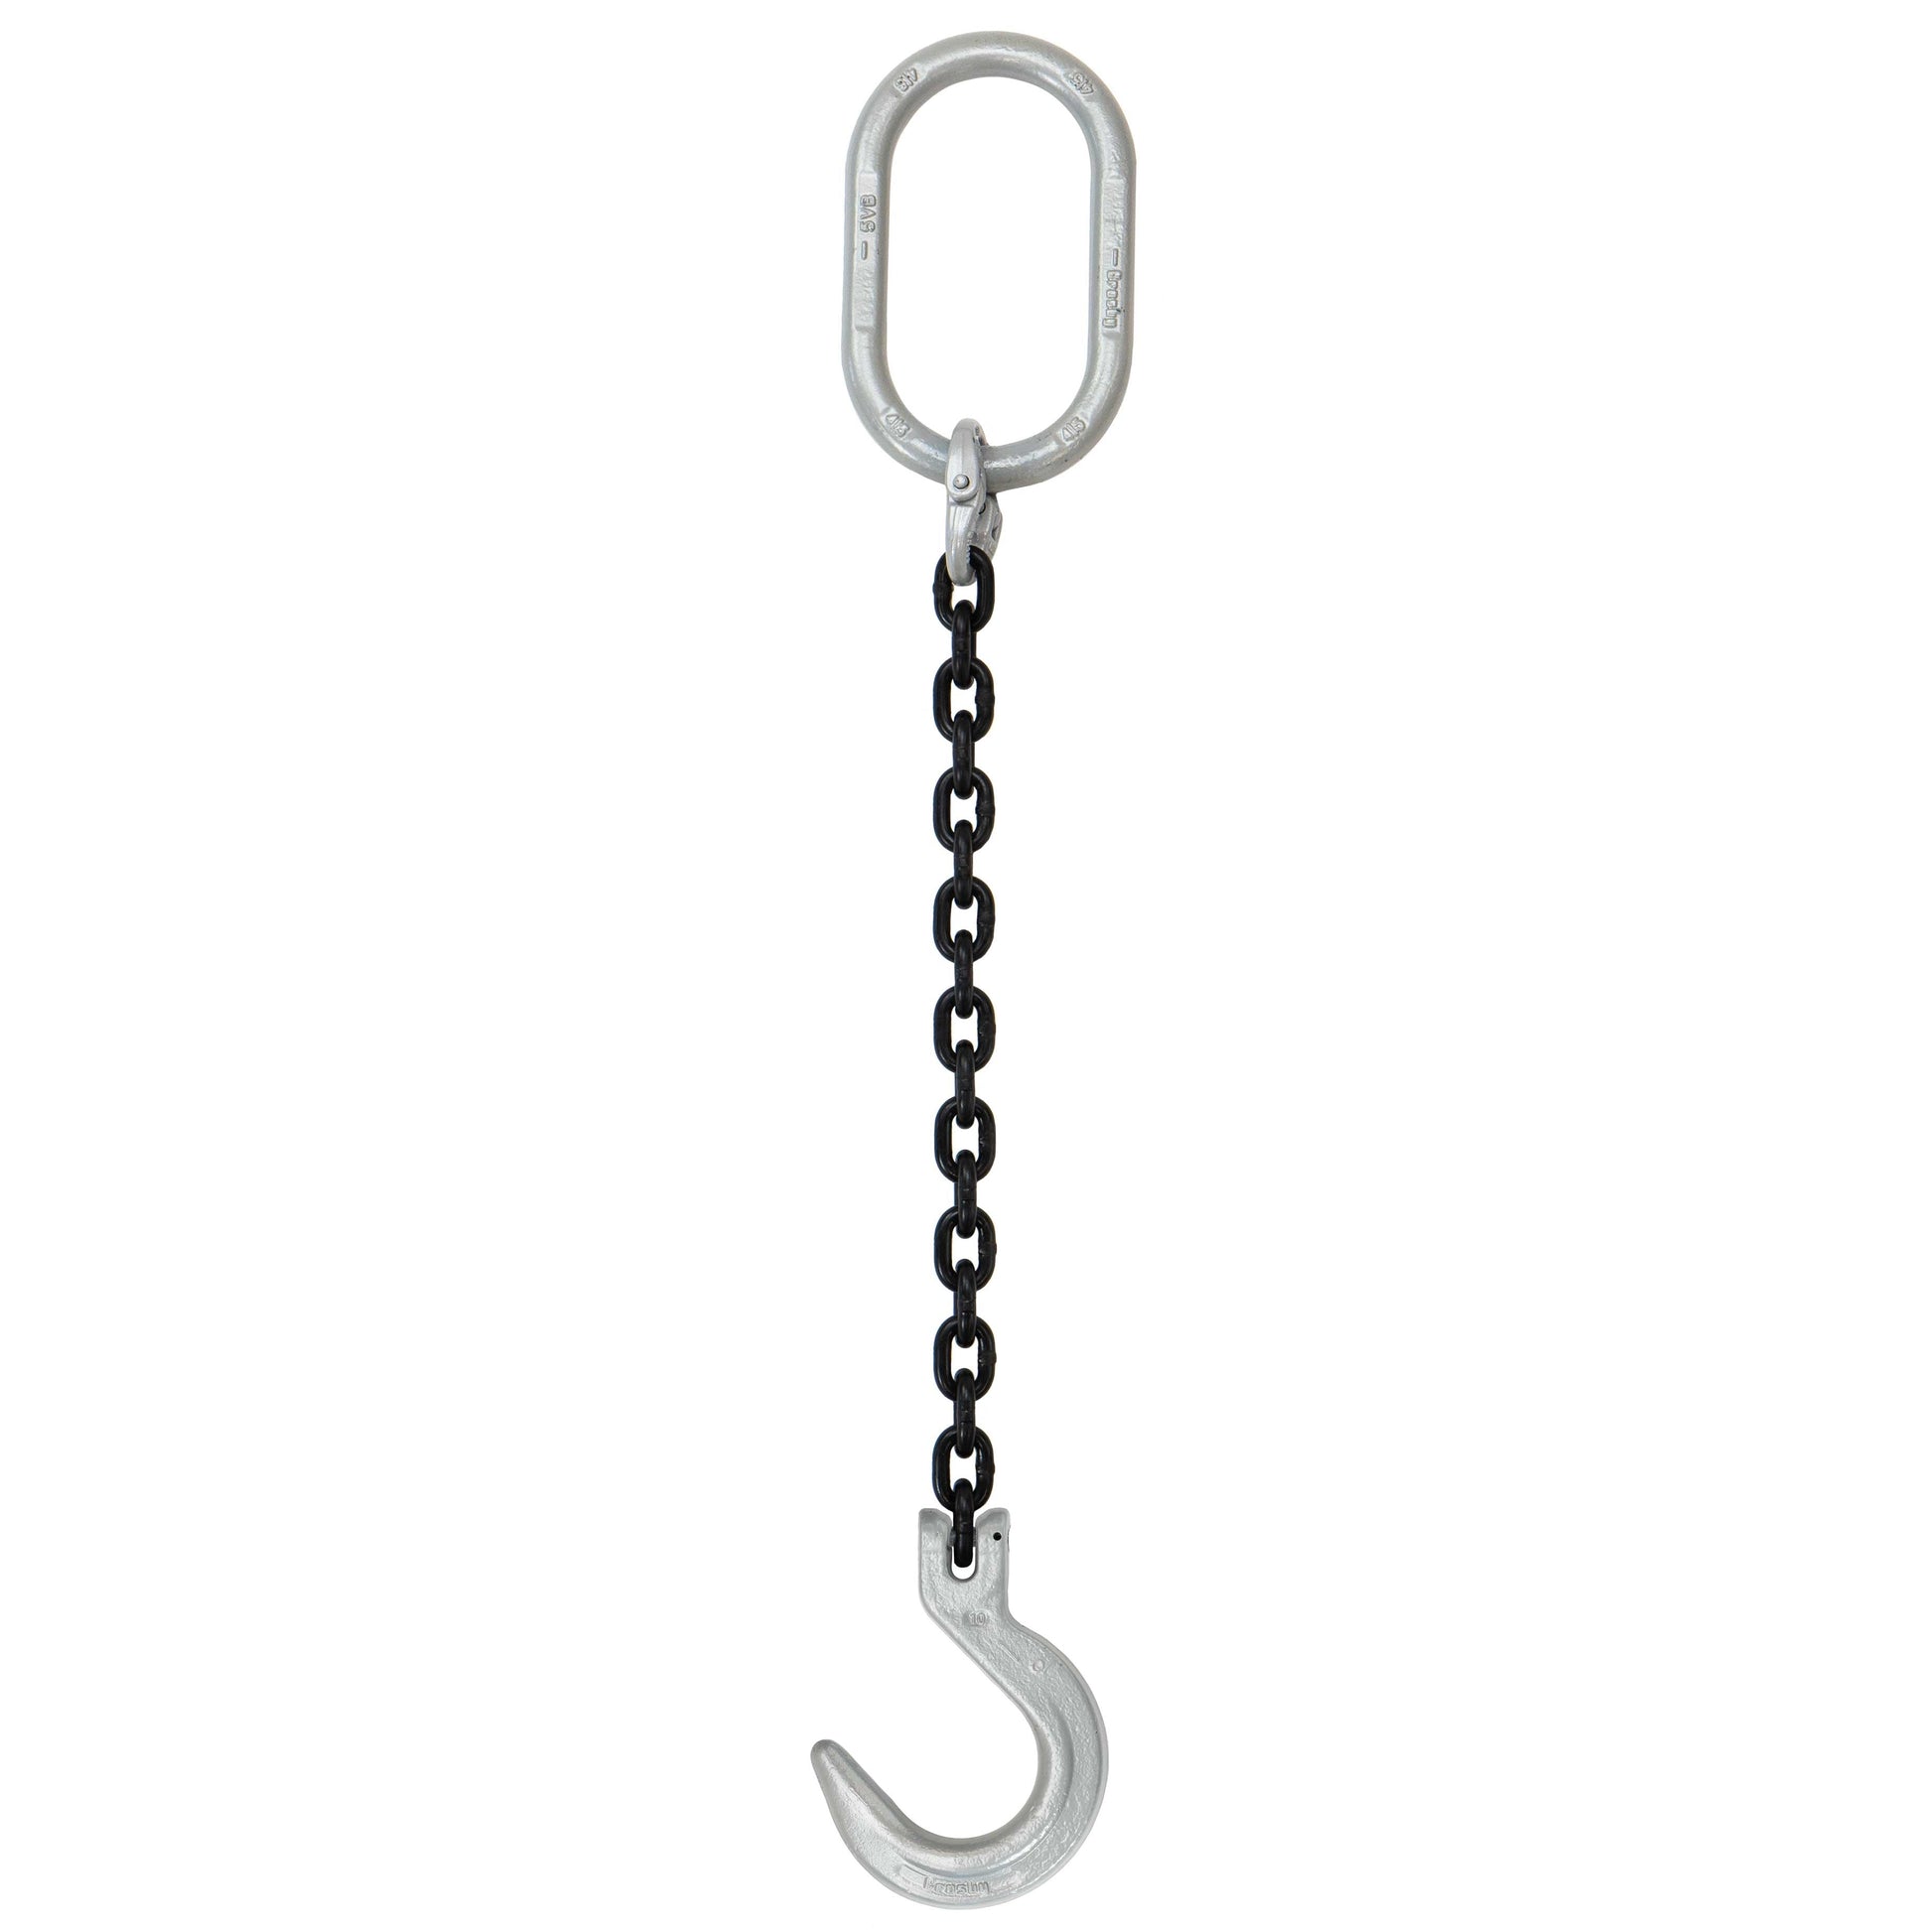 12 inch x 3 foot Domestic Single Leg Chain Sling w Crosby Foundry Hook Grade 100 image 1 of 2